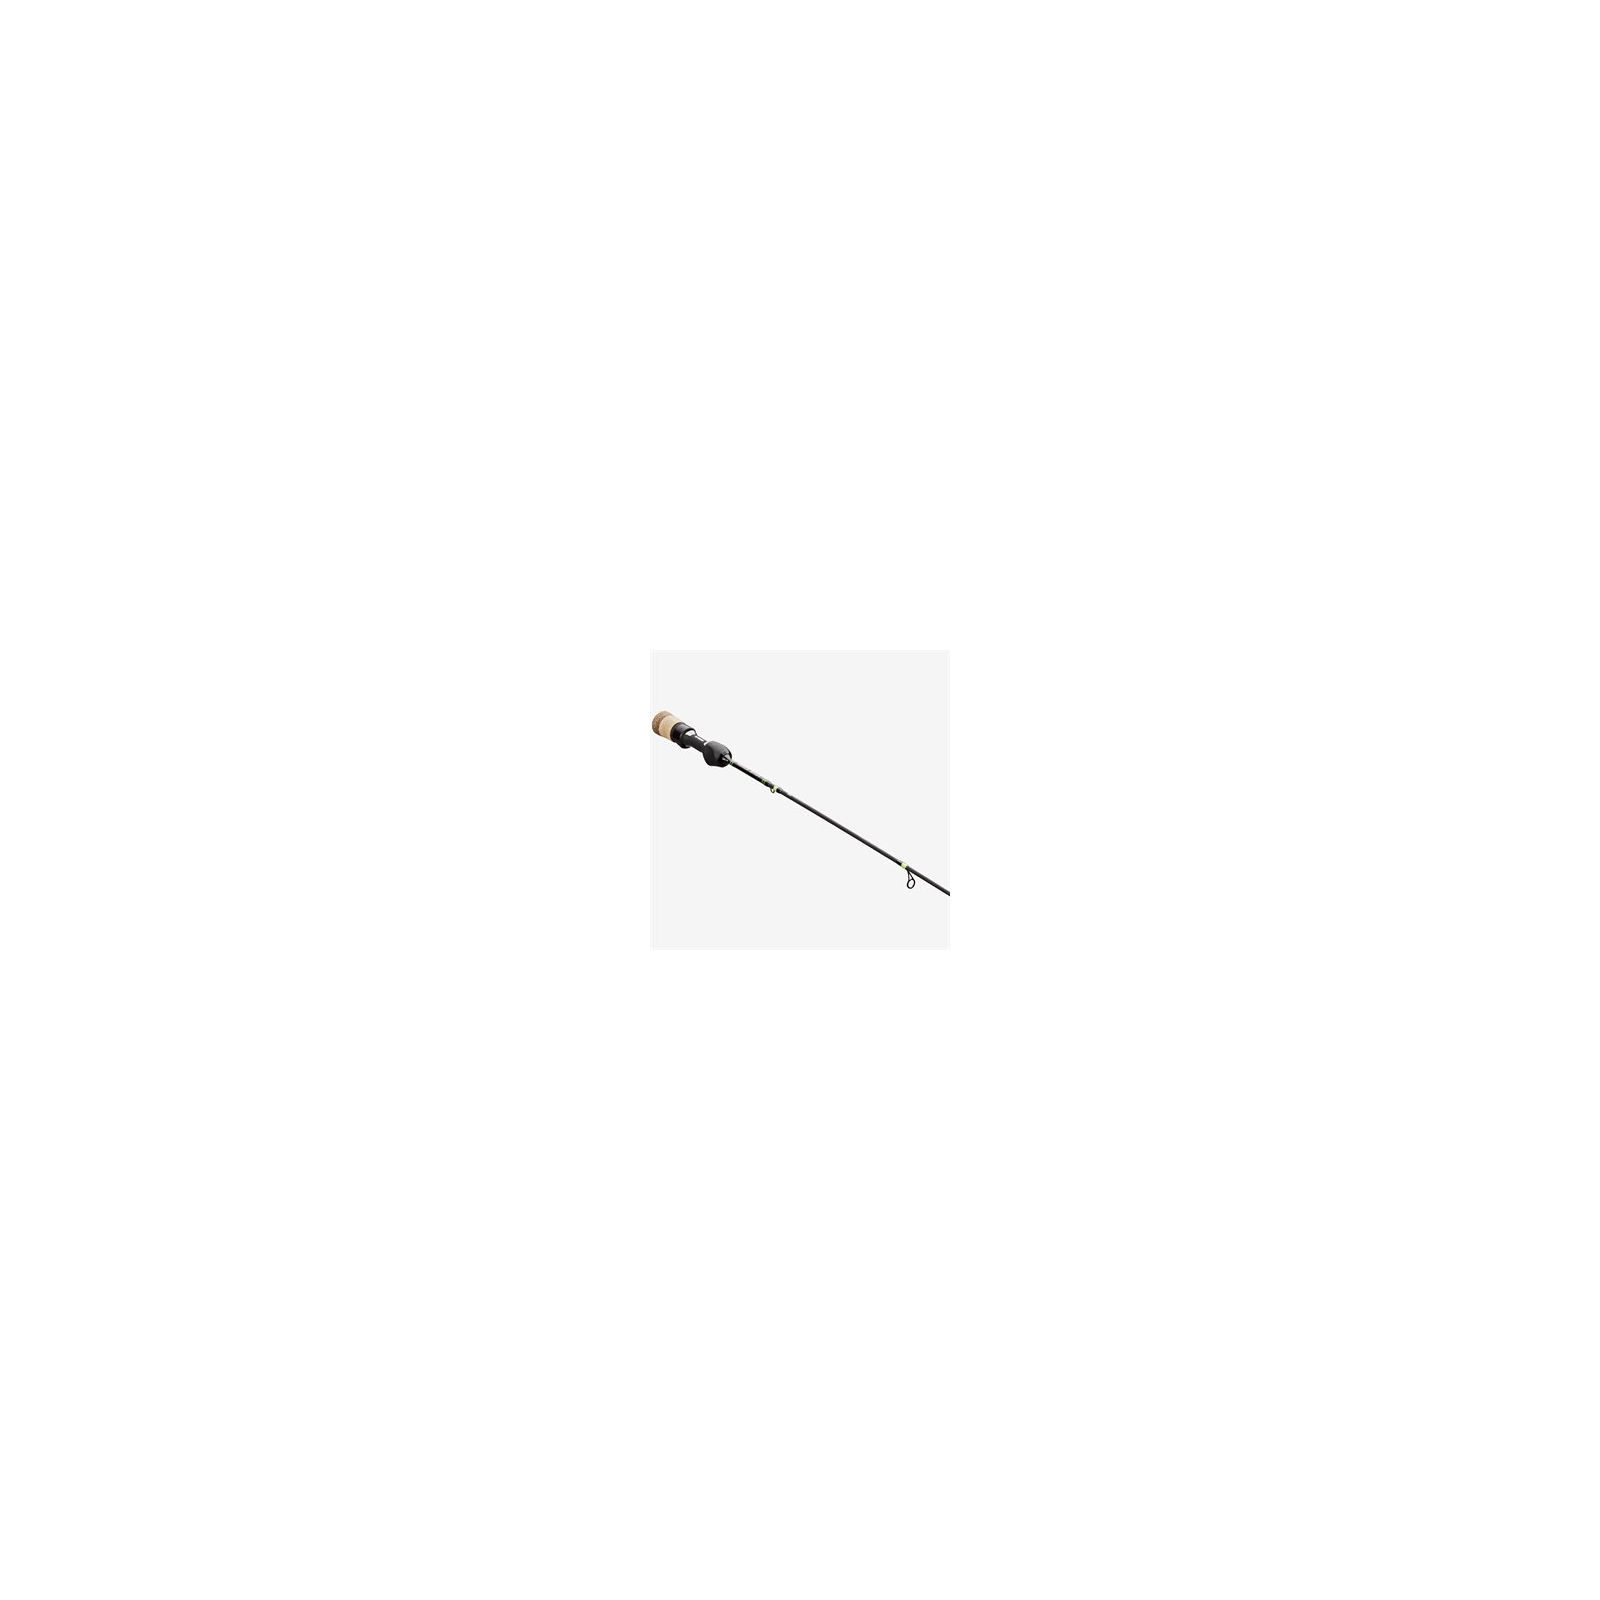 https://static.upnorthsports.com/Image/catimages/13-fishing-ticklie-stick-ice-rod-1600.png